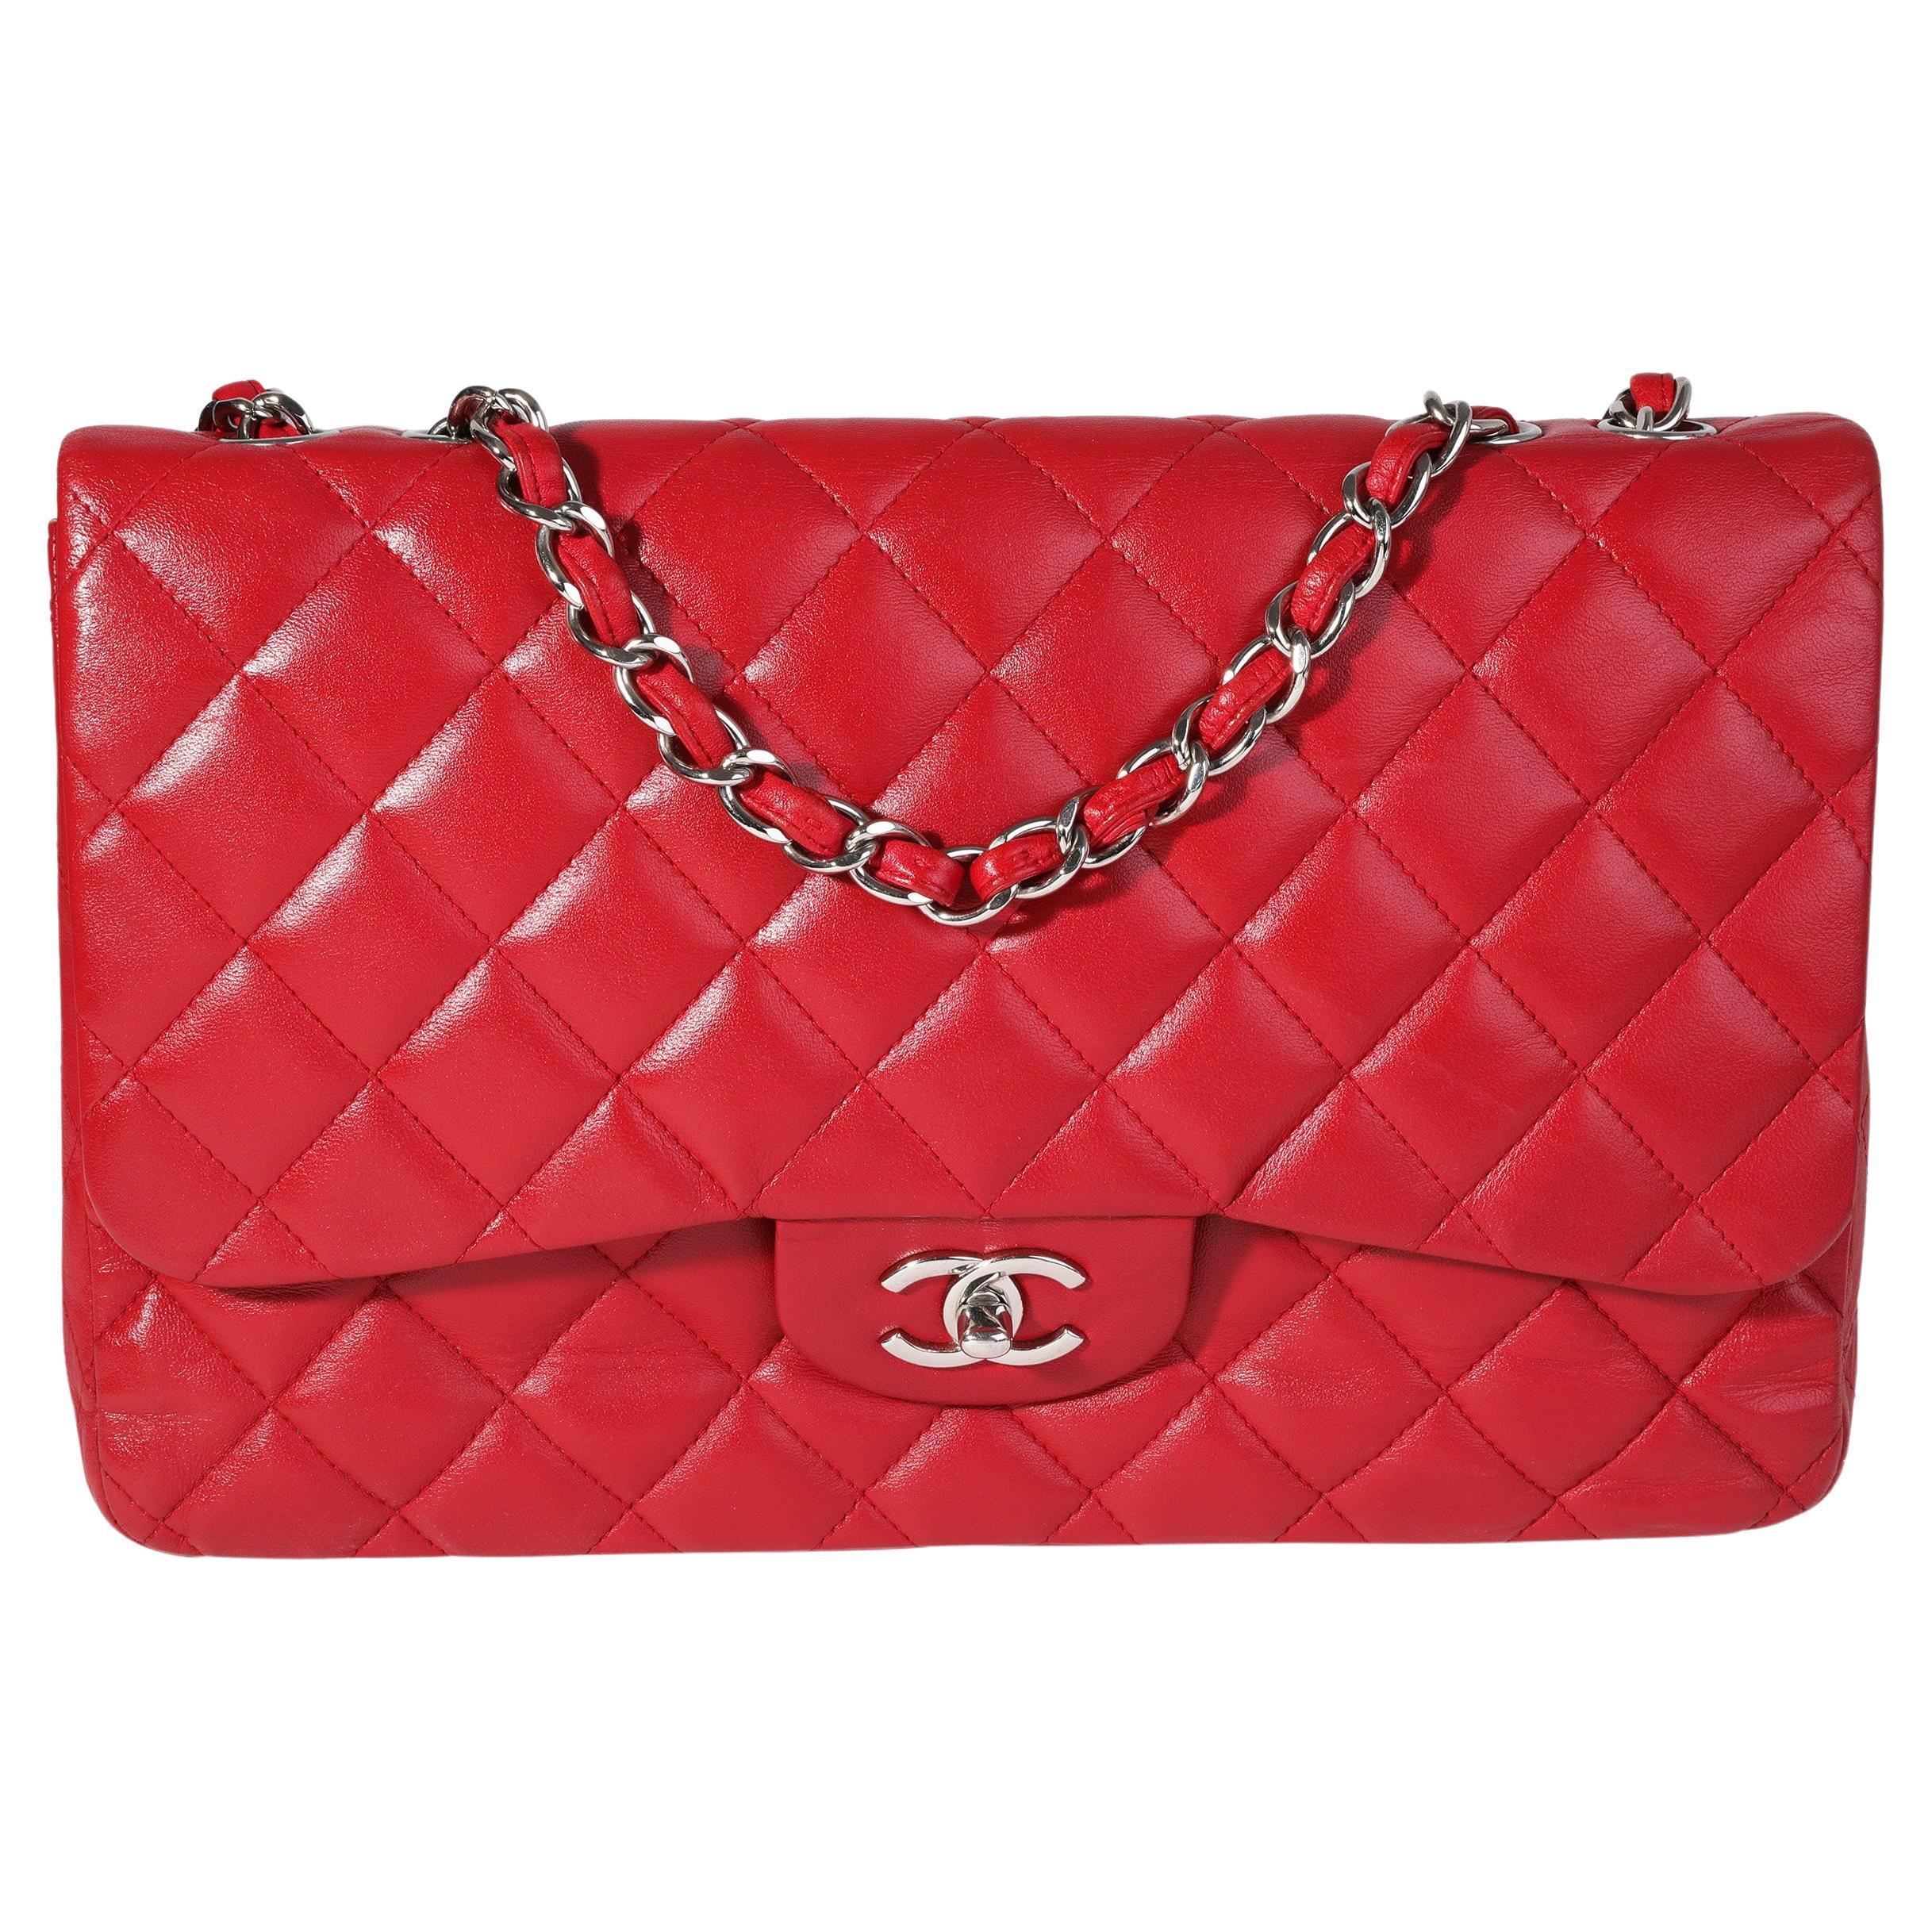 CHANEL Jumbo Double Flap Patent Red Leather